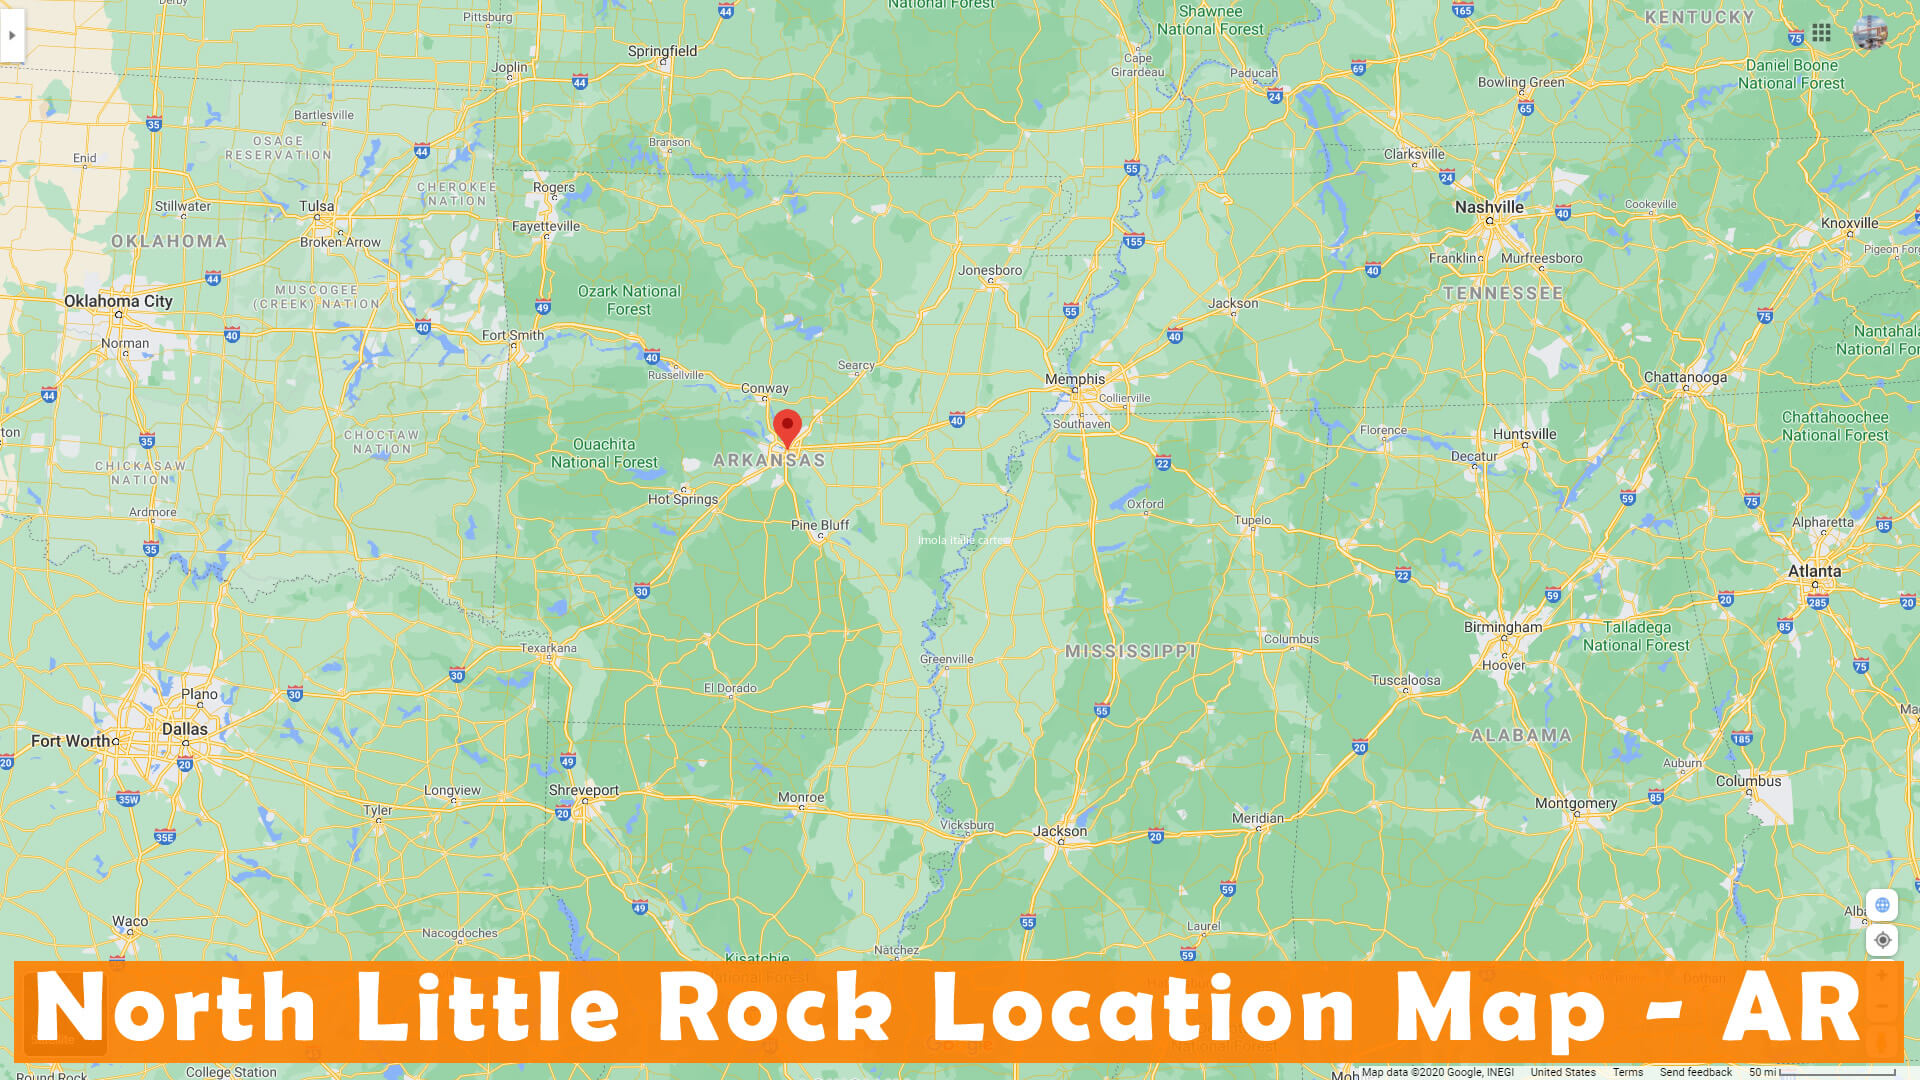 North Little Rock Location Map